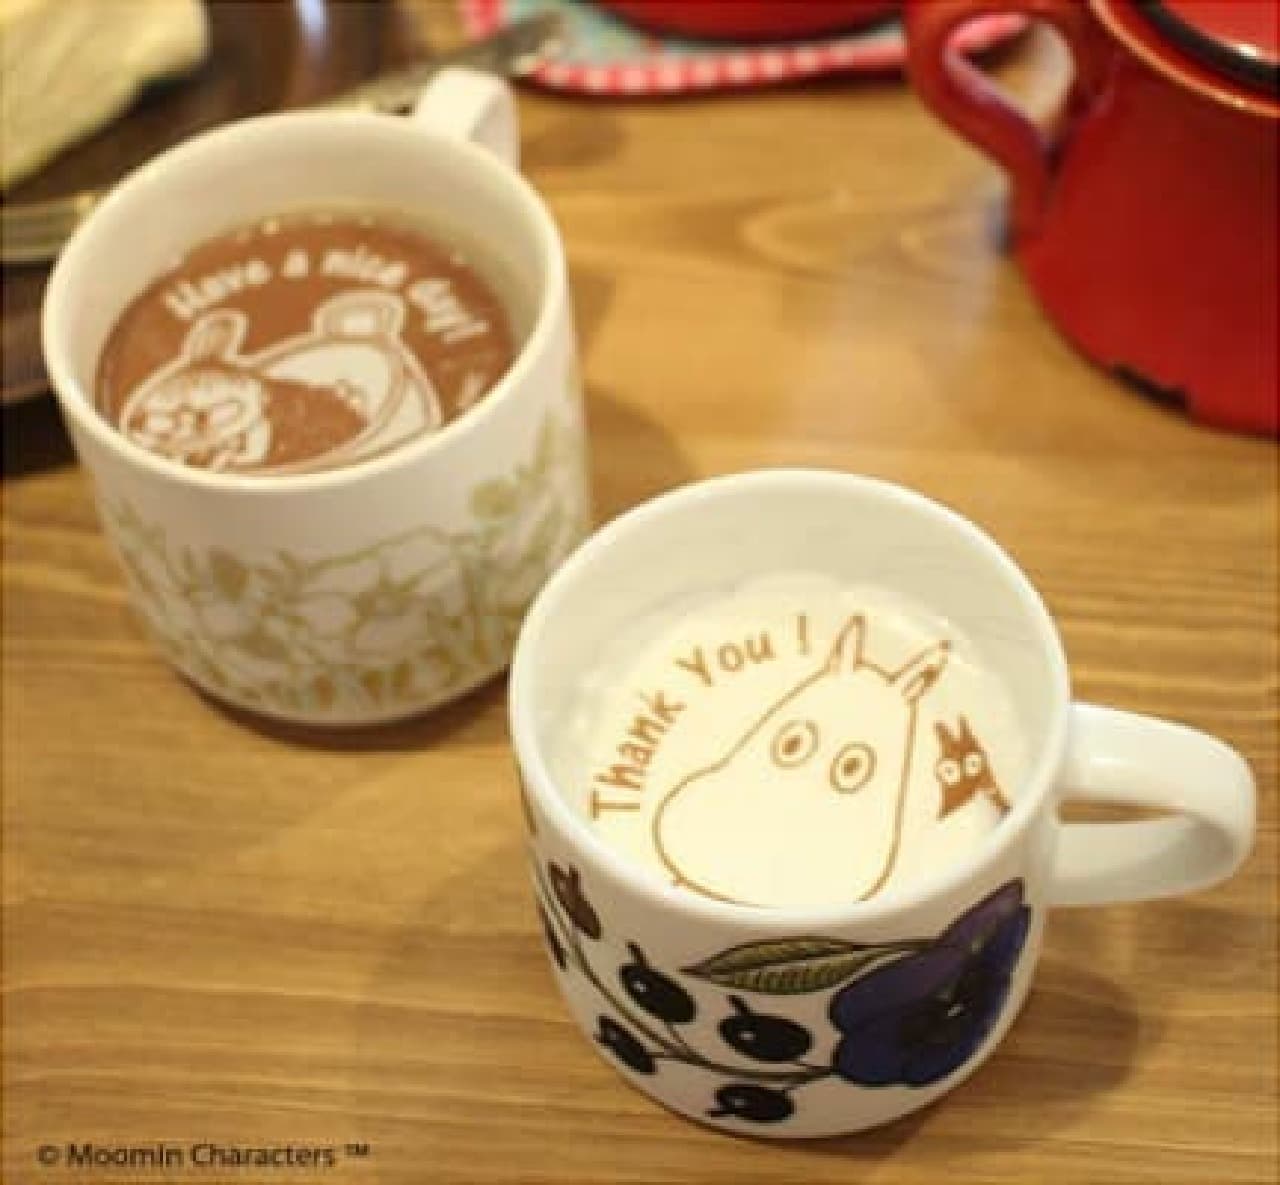 "Moomin Message Latte" is now available!